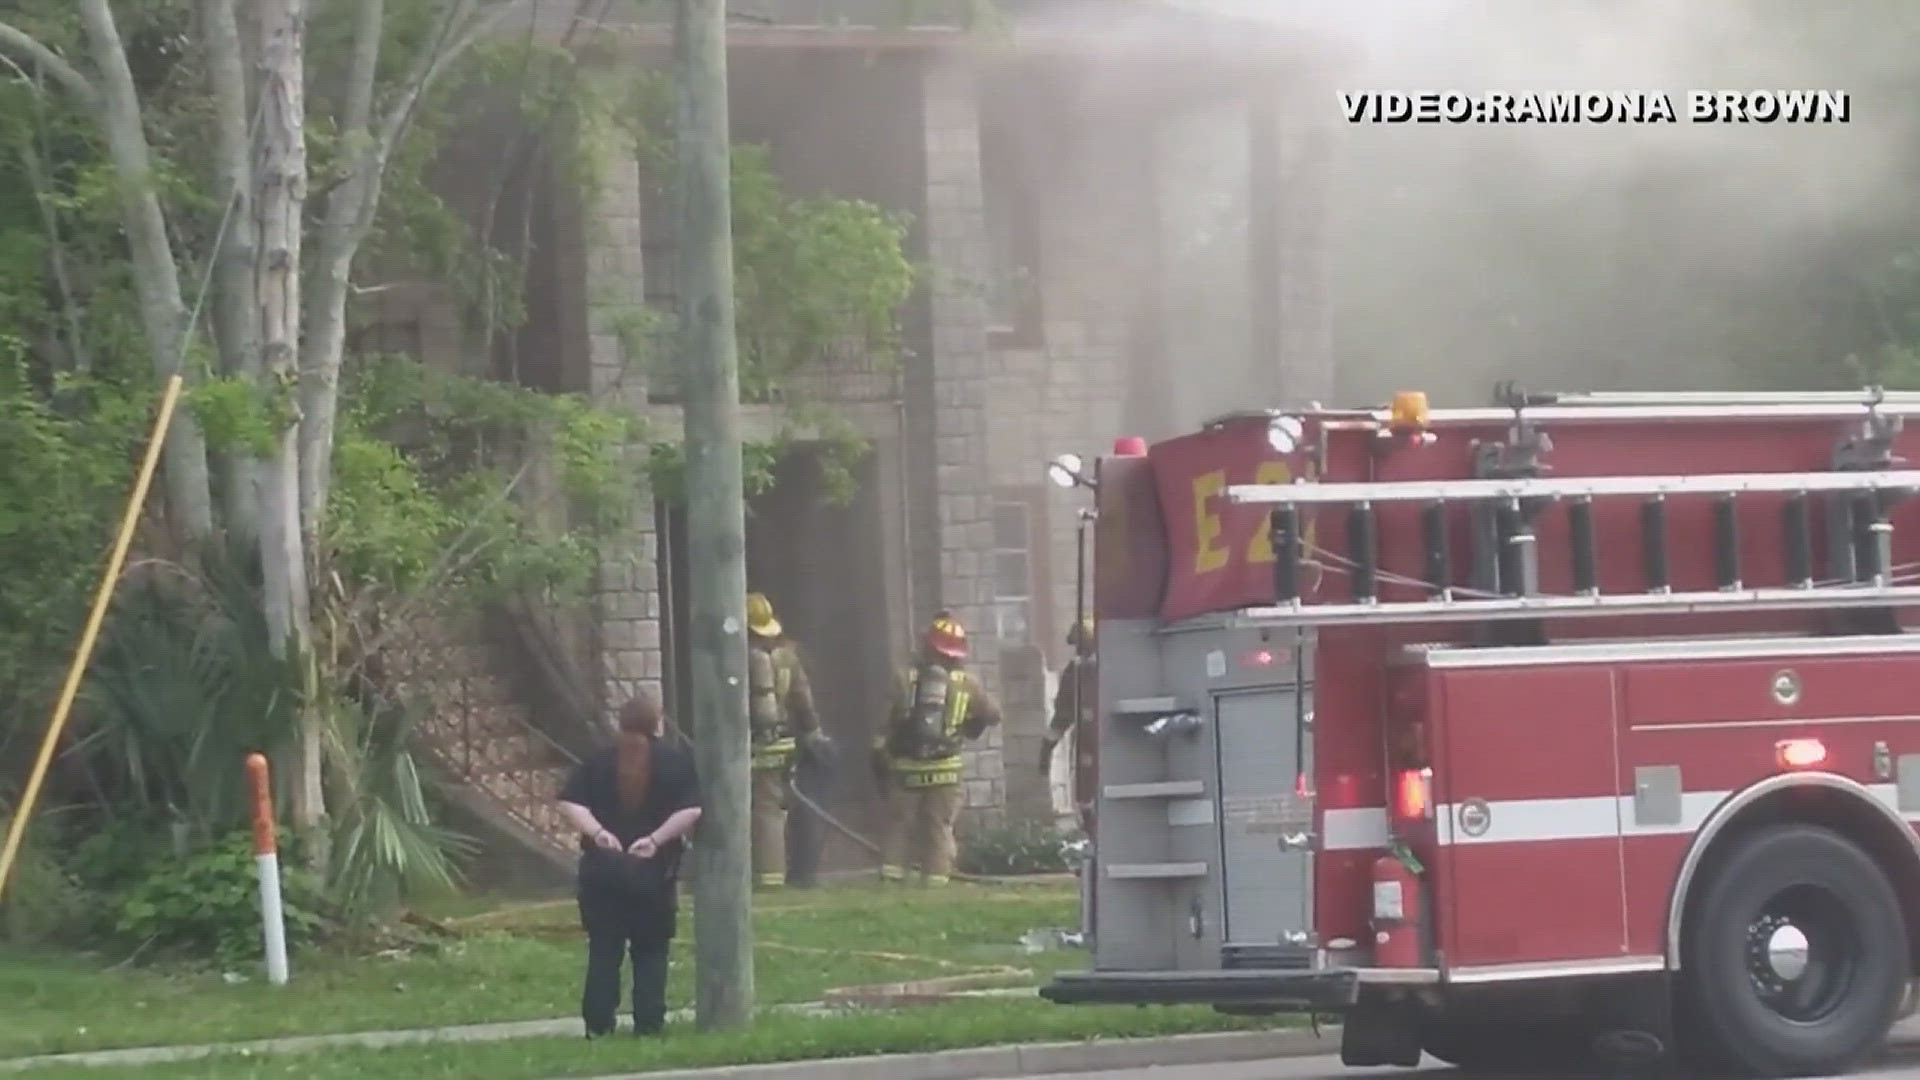 No injuries have been reported after a fire broke out at a four-unit apartment building in Beaumont Tuesday morning.